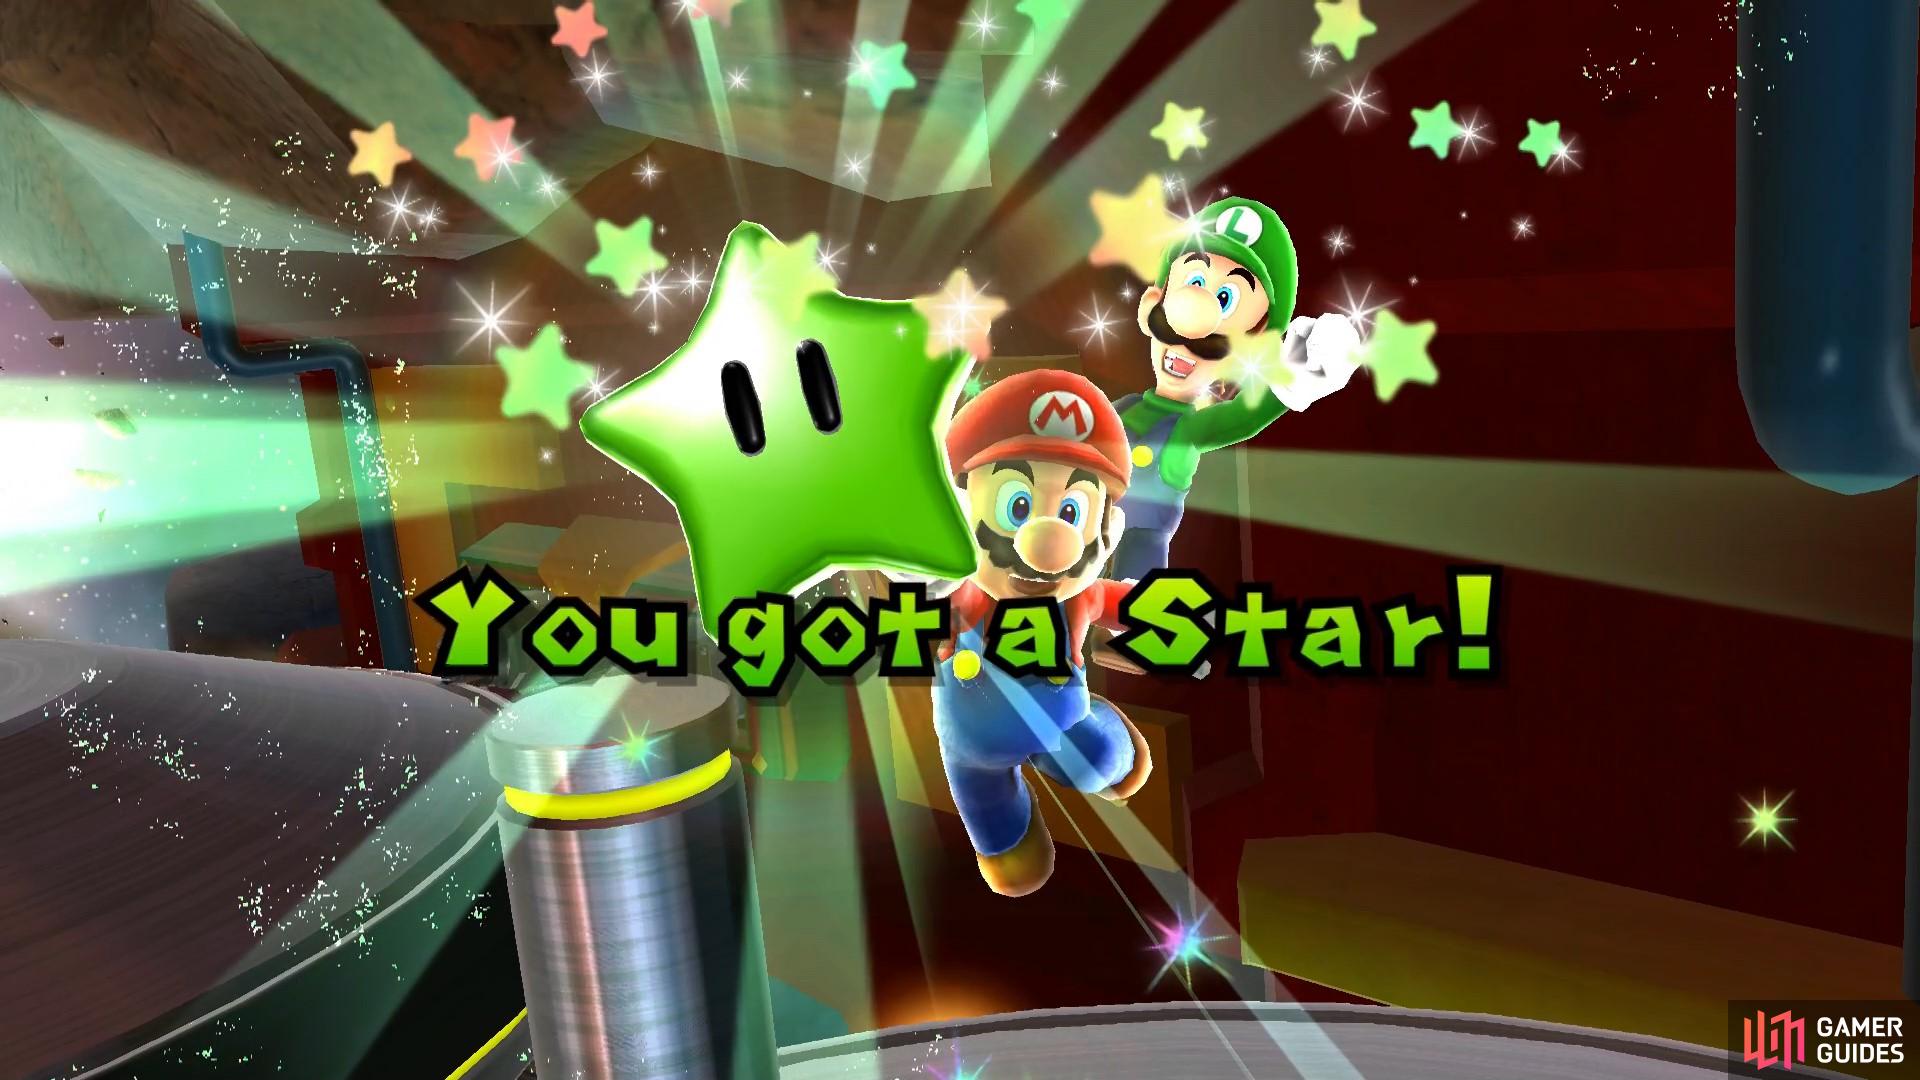 Free Luigi and he’ll give you a rare Green Star!